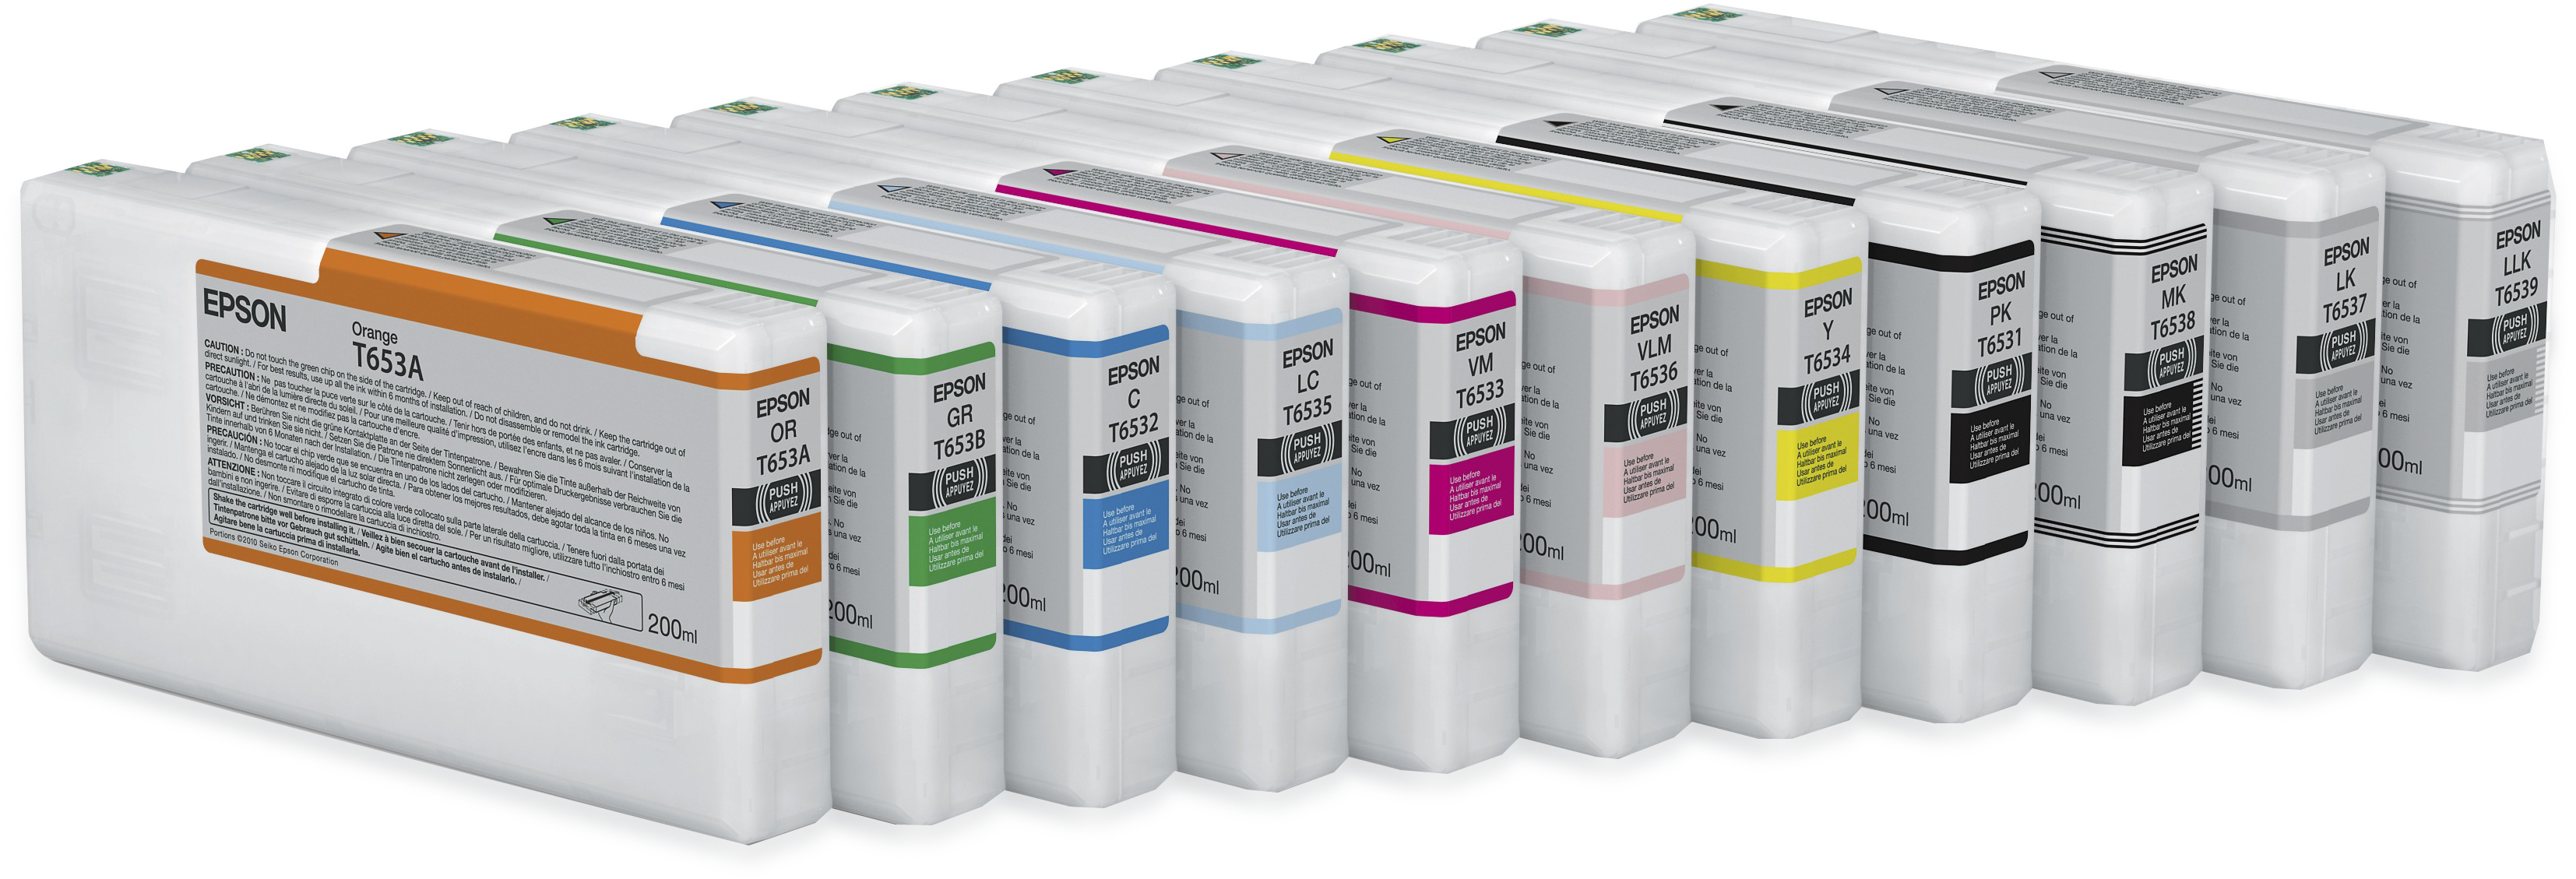 Epson C13T913A00 (T913A) Ink Others, 200ml